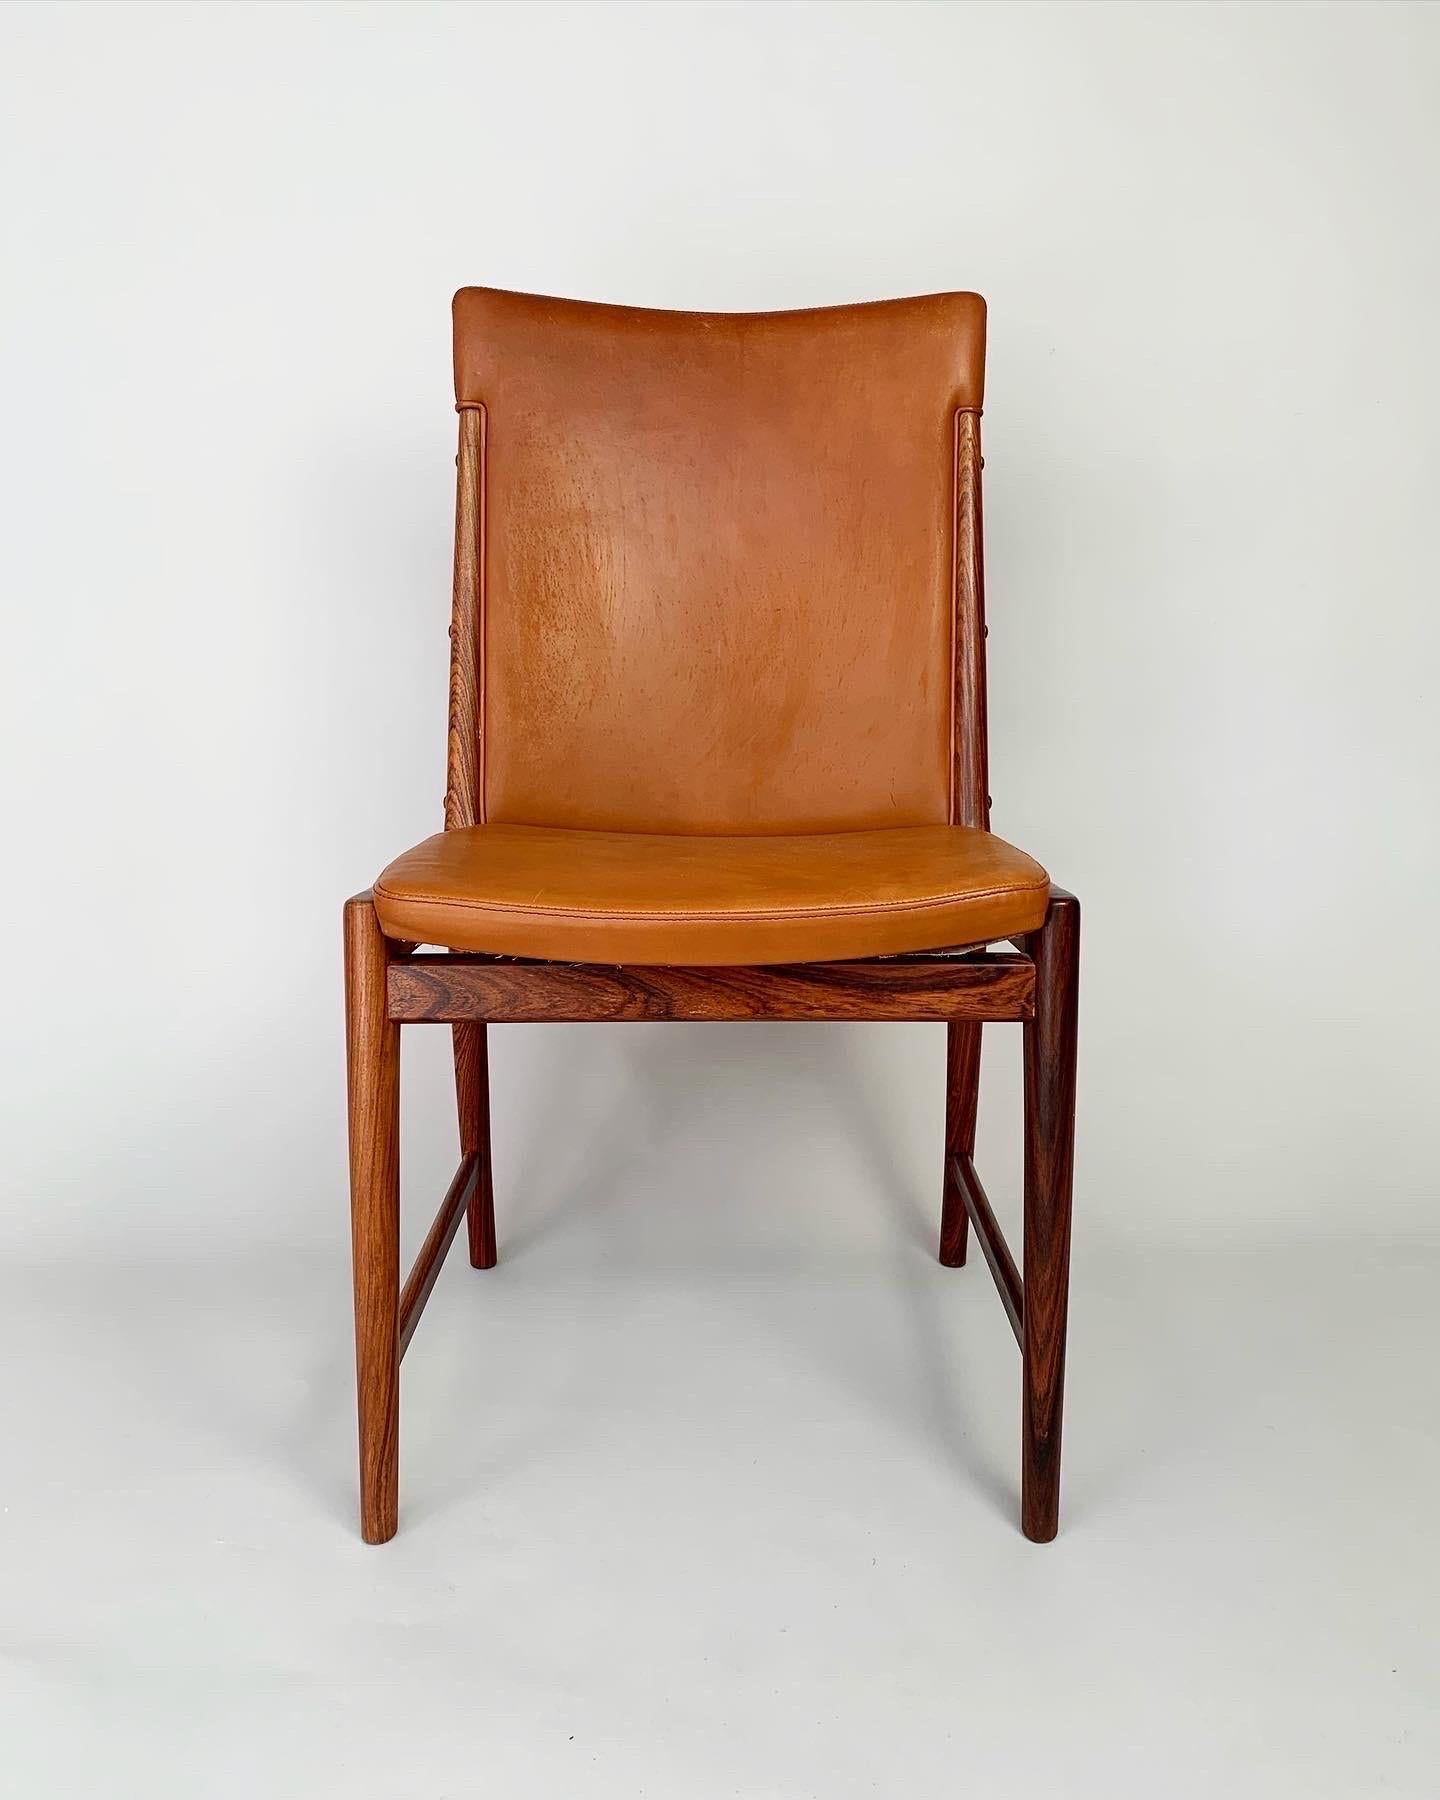 Kai Lyngfeldt Larsen chair in rosewood & cognac colored leather, made by Søren Willadsen Møbelfabrik in Denmark in the 1960s.

Solid frame in rosewood with original leather upholstery with beautiful stitching.

Very good condition with normal